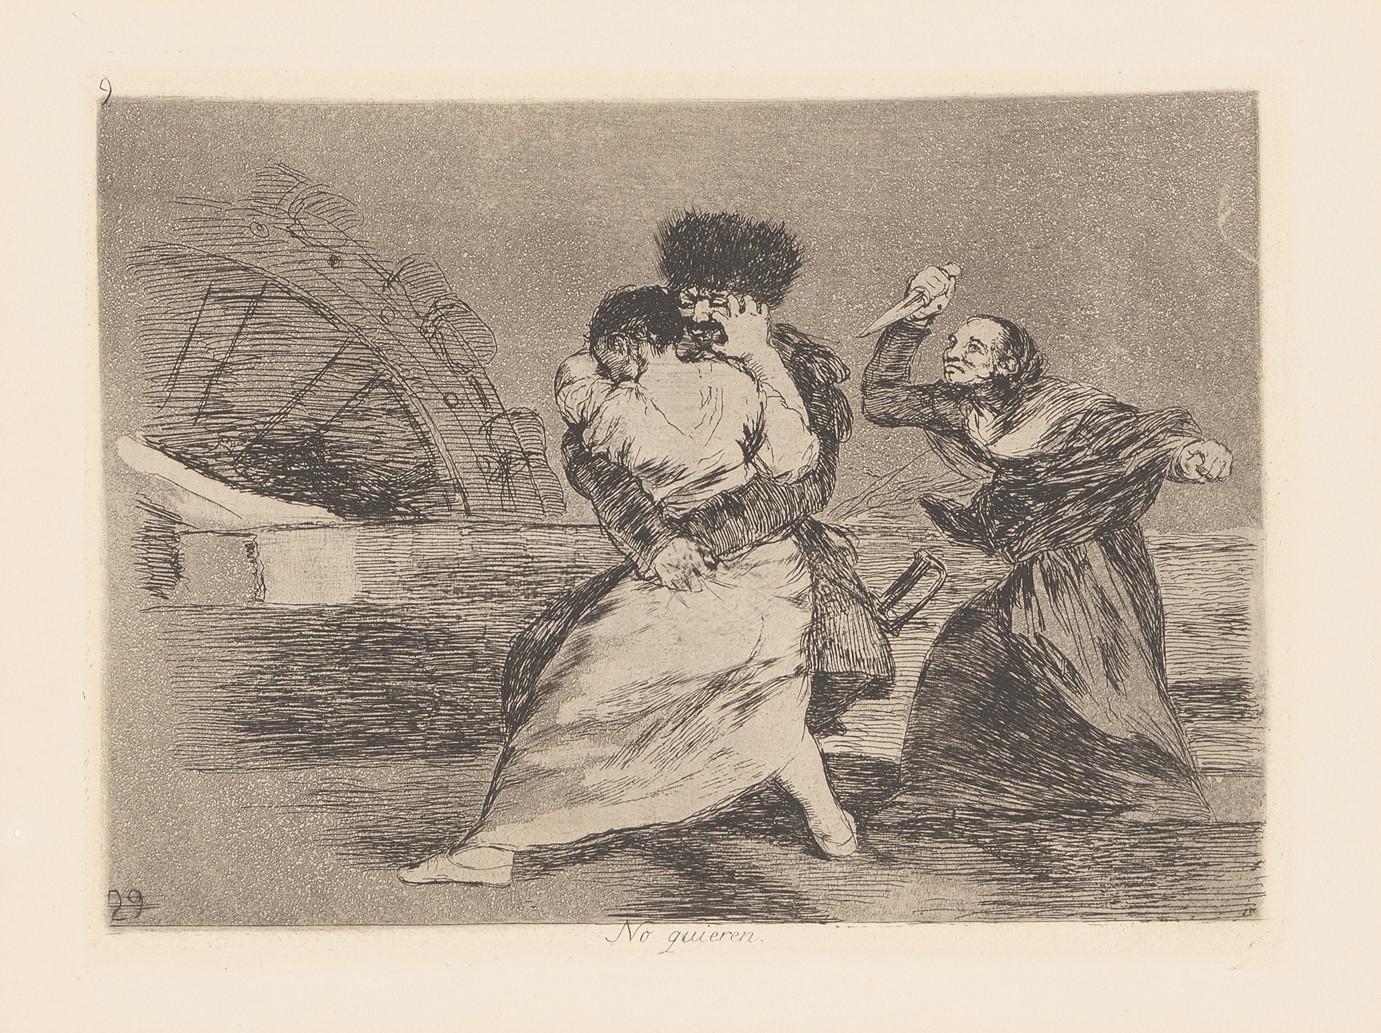 They don’t like it. (No quieren) - Goya y Lucientes Francisco